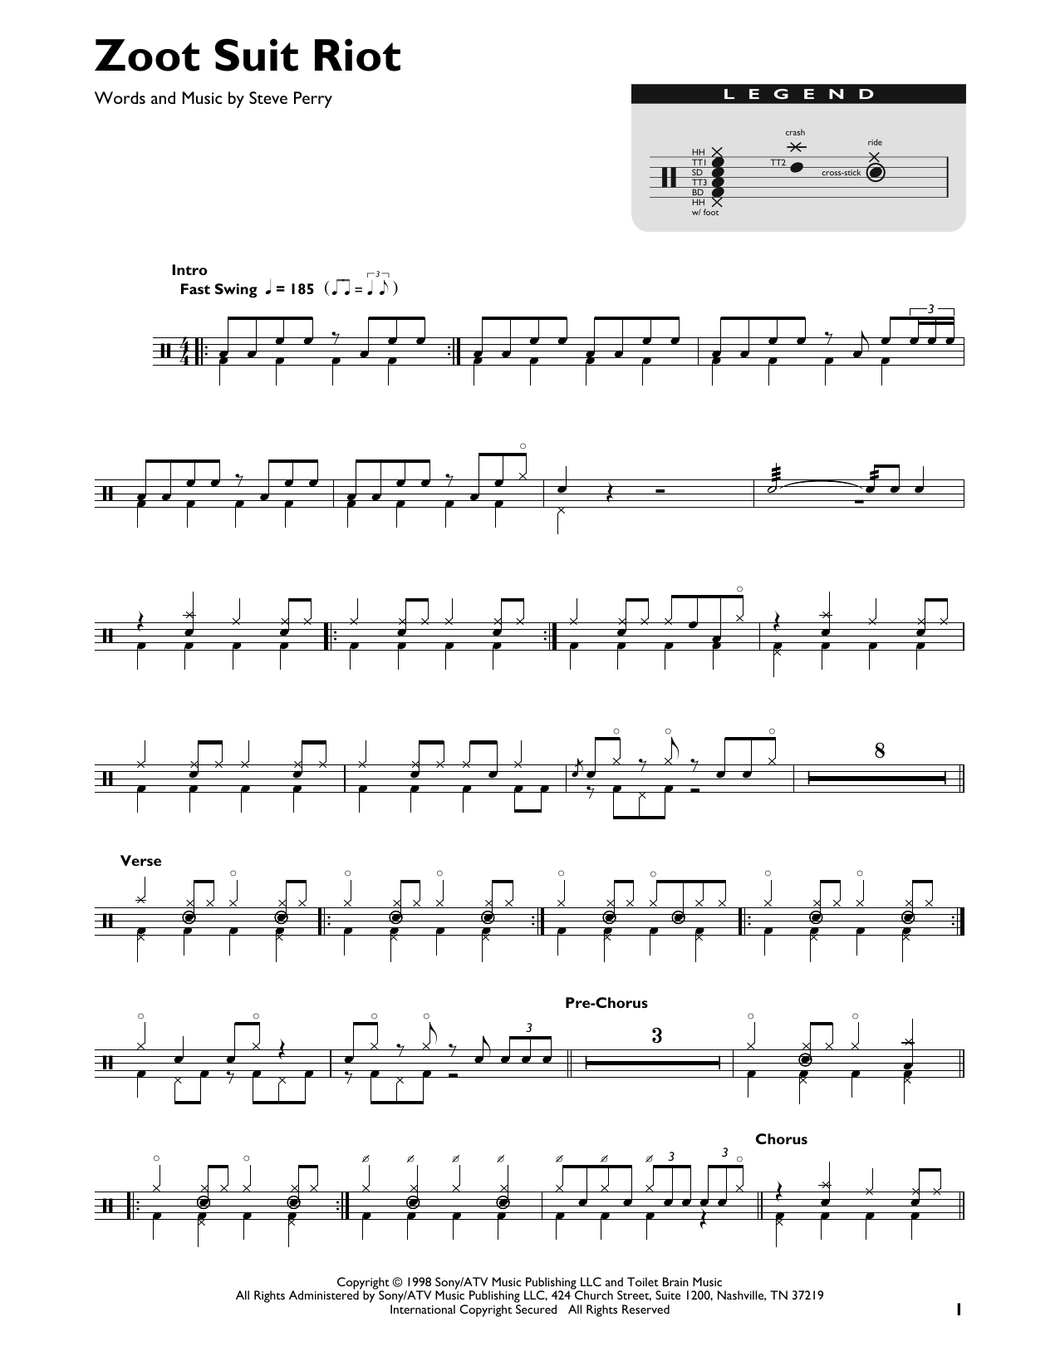 Zoot Suit Riot - Cherry Poppin' Daddies - Full Drum Transcription / Drum Sheet Music - SheetMusicDirect DT